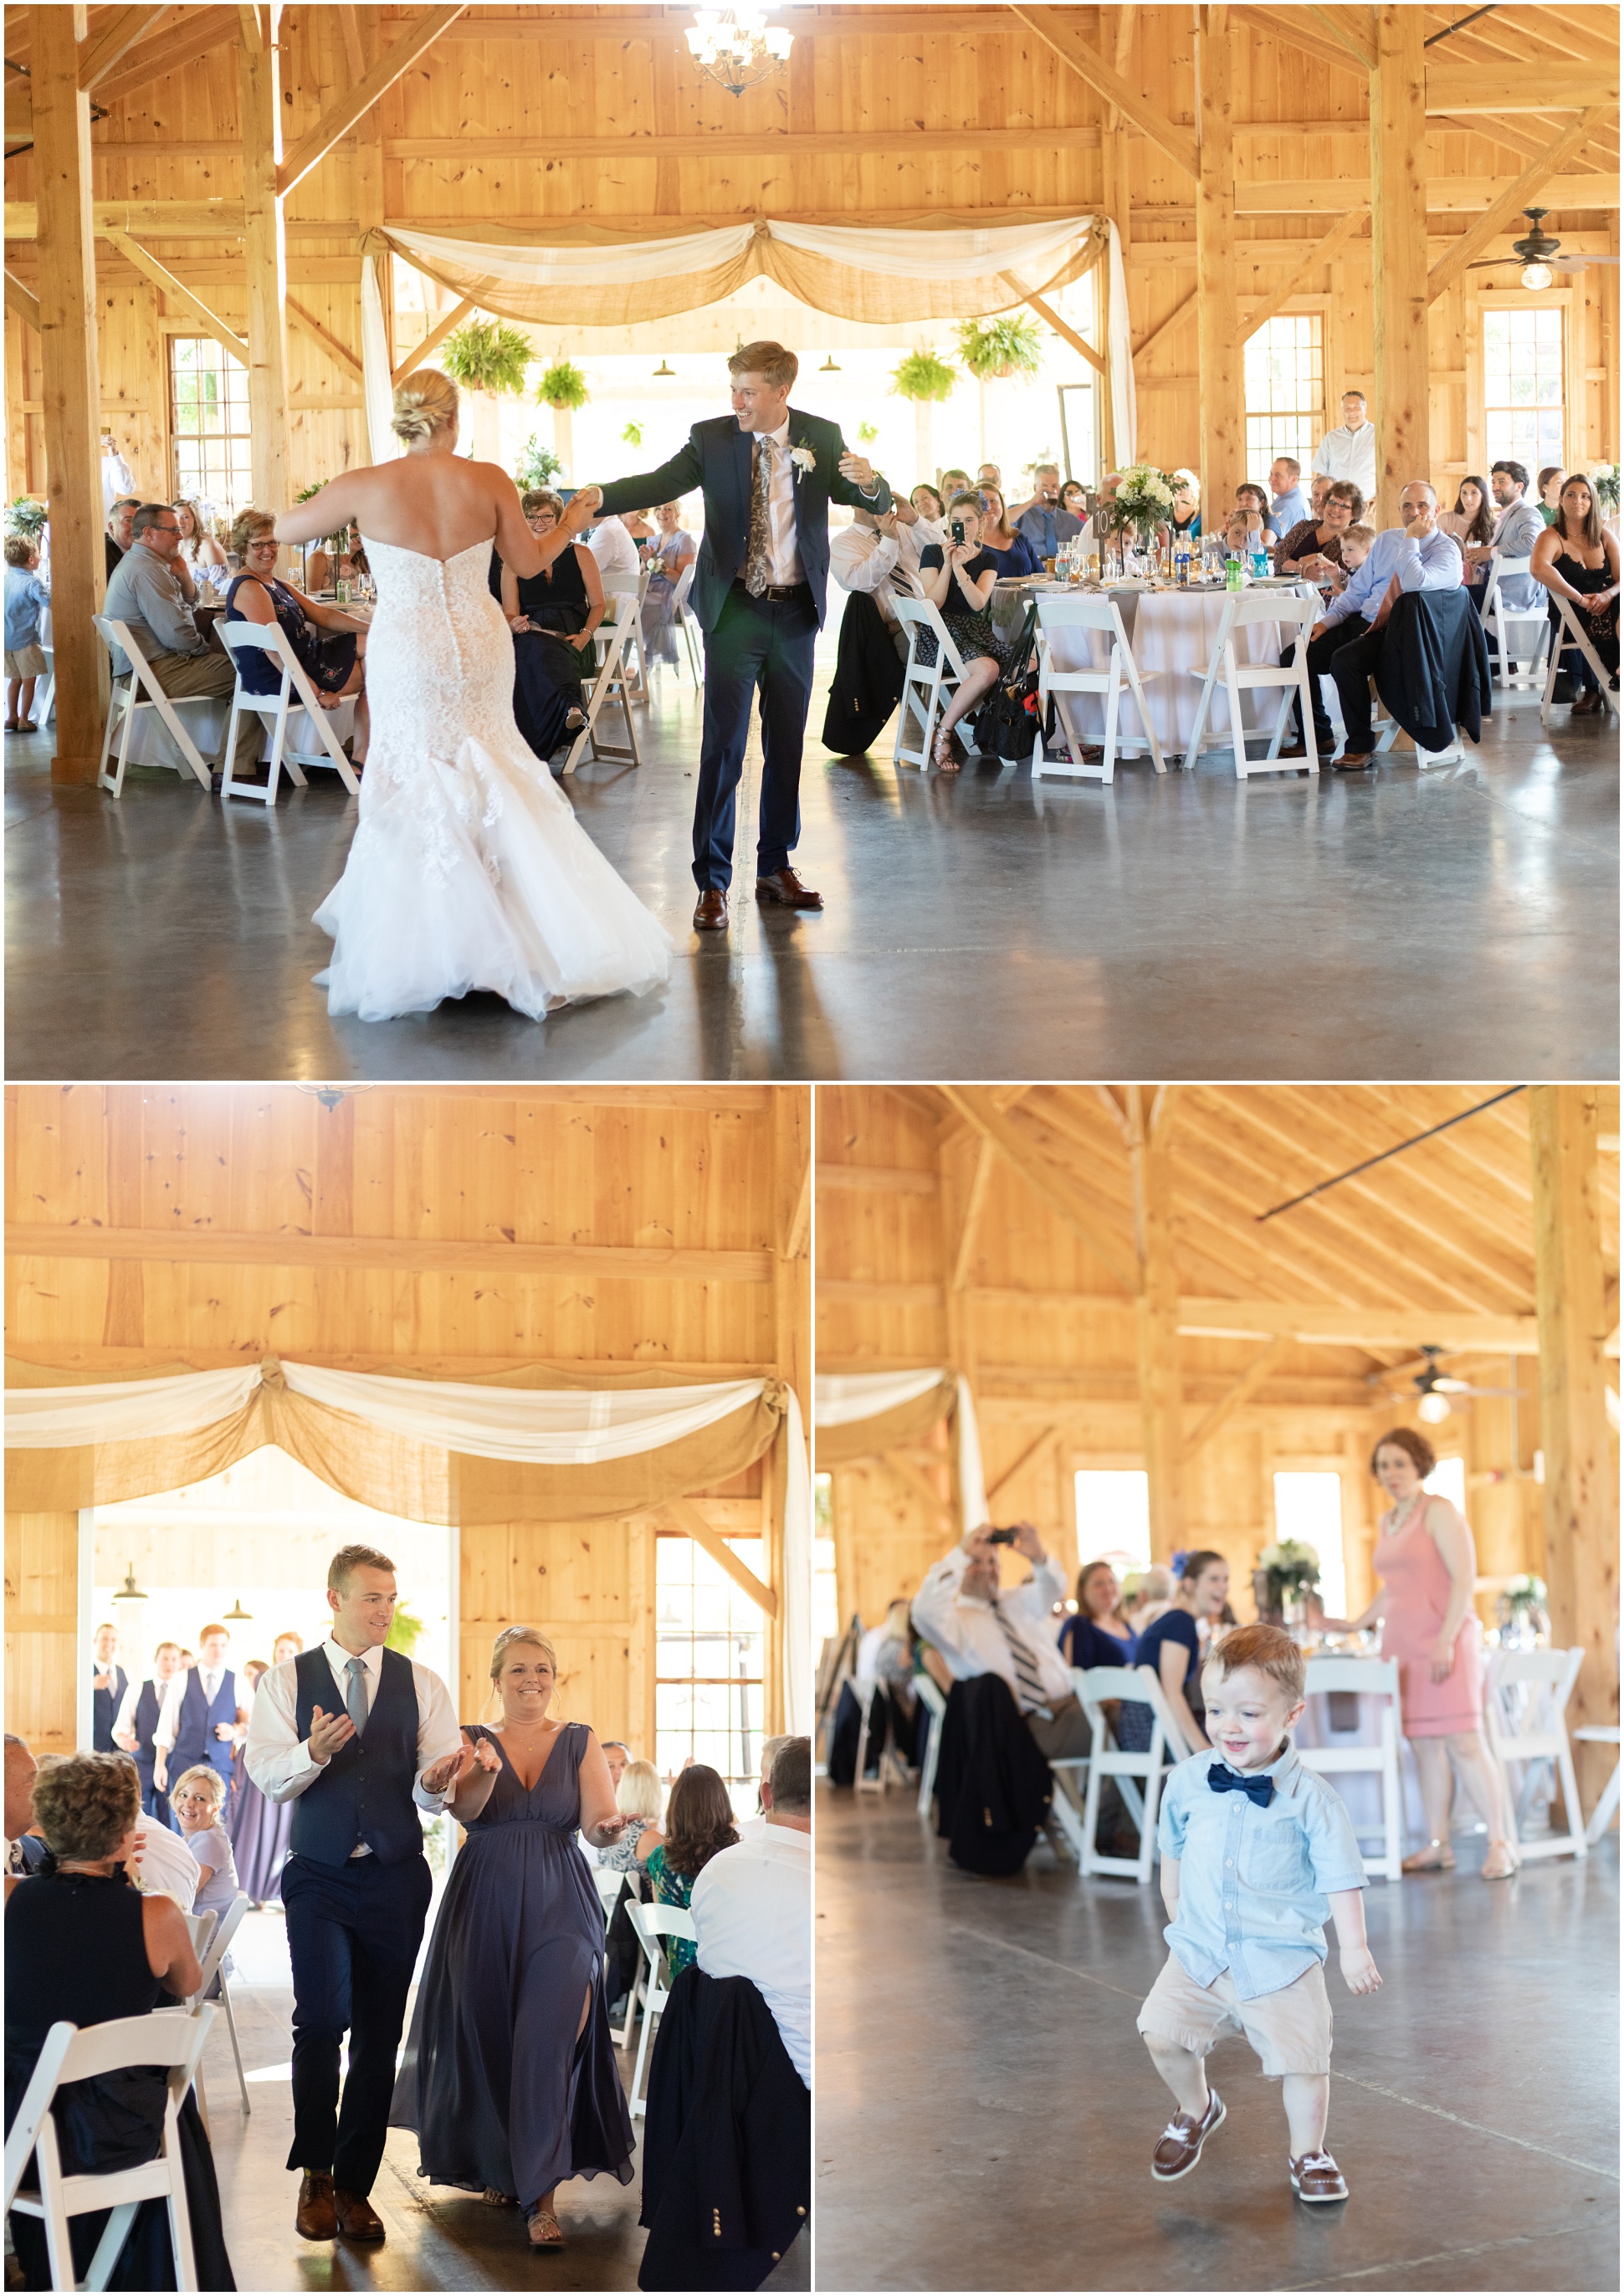 Bride and groom dancing at reception, little boy dancing, and the bridal party entering the dance floor